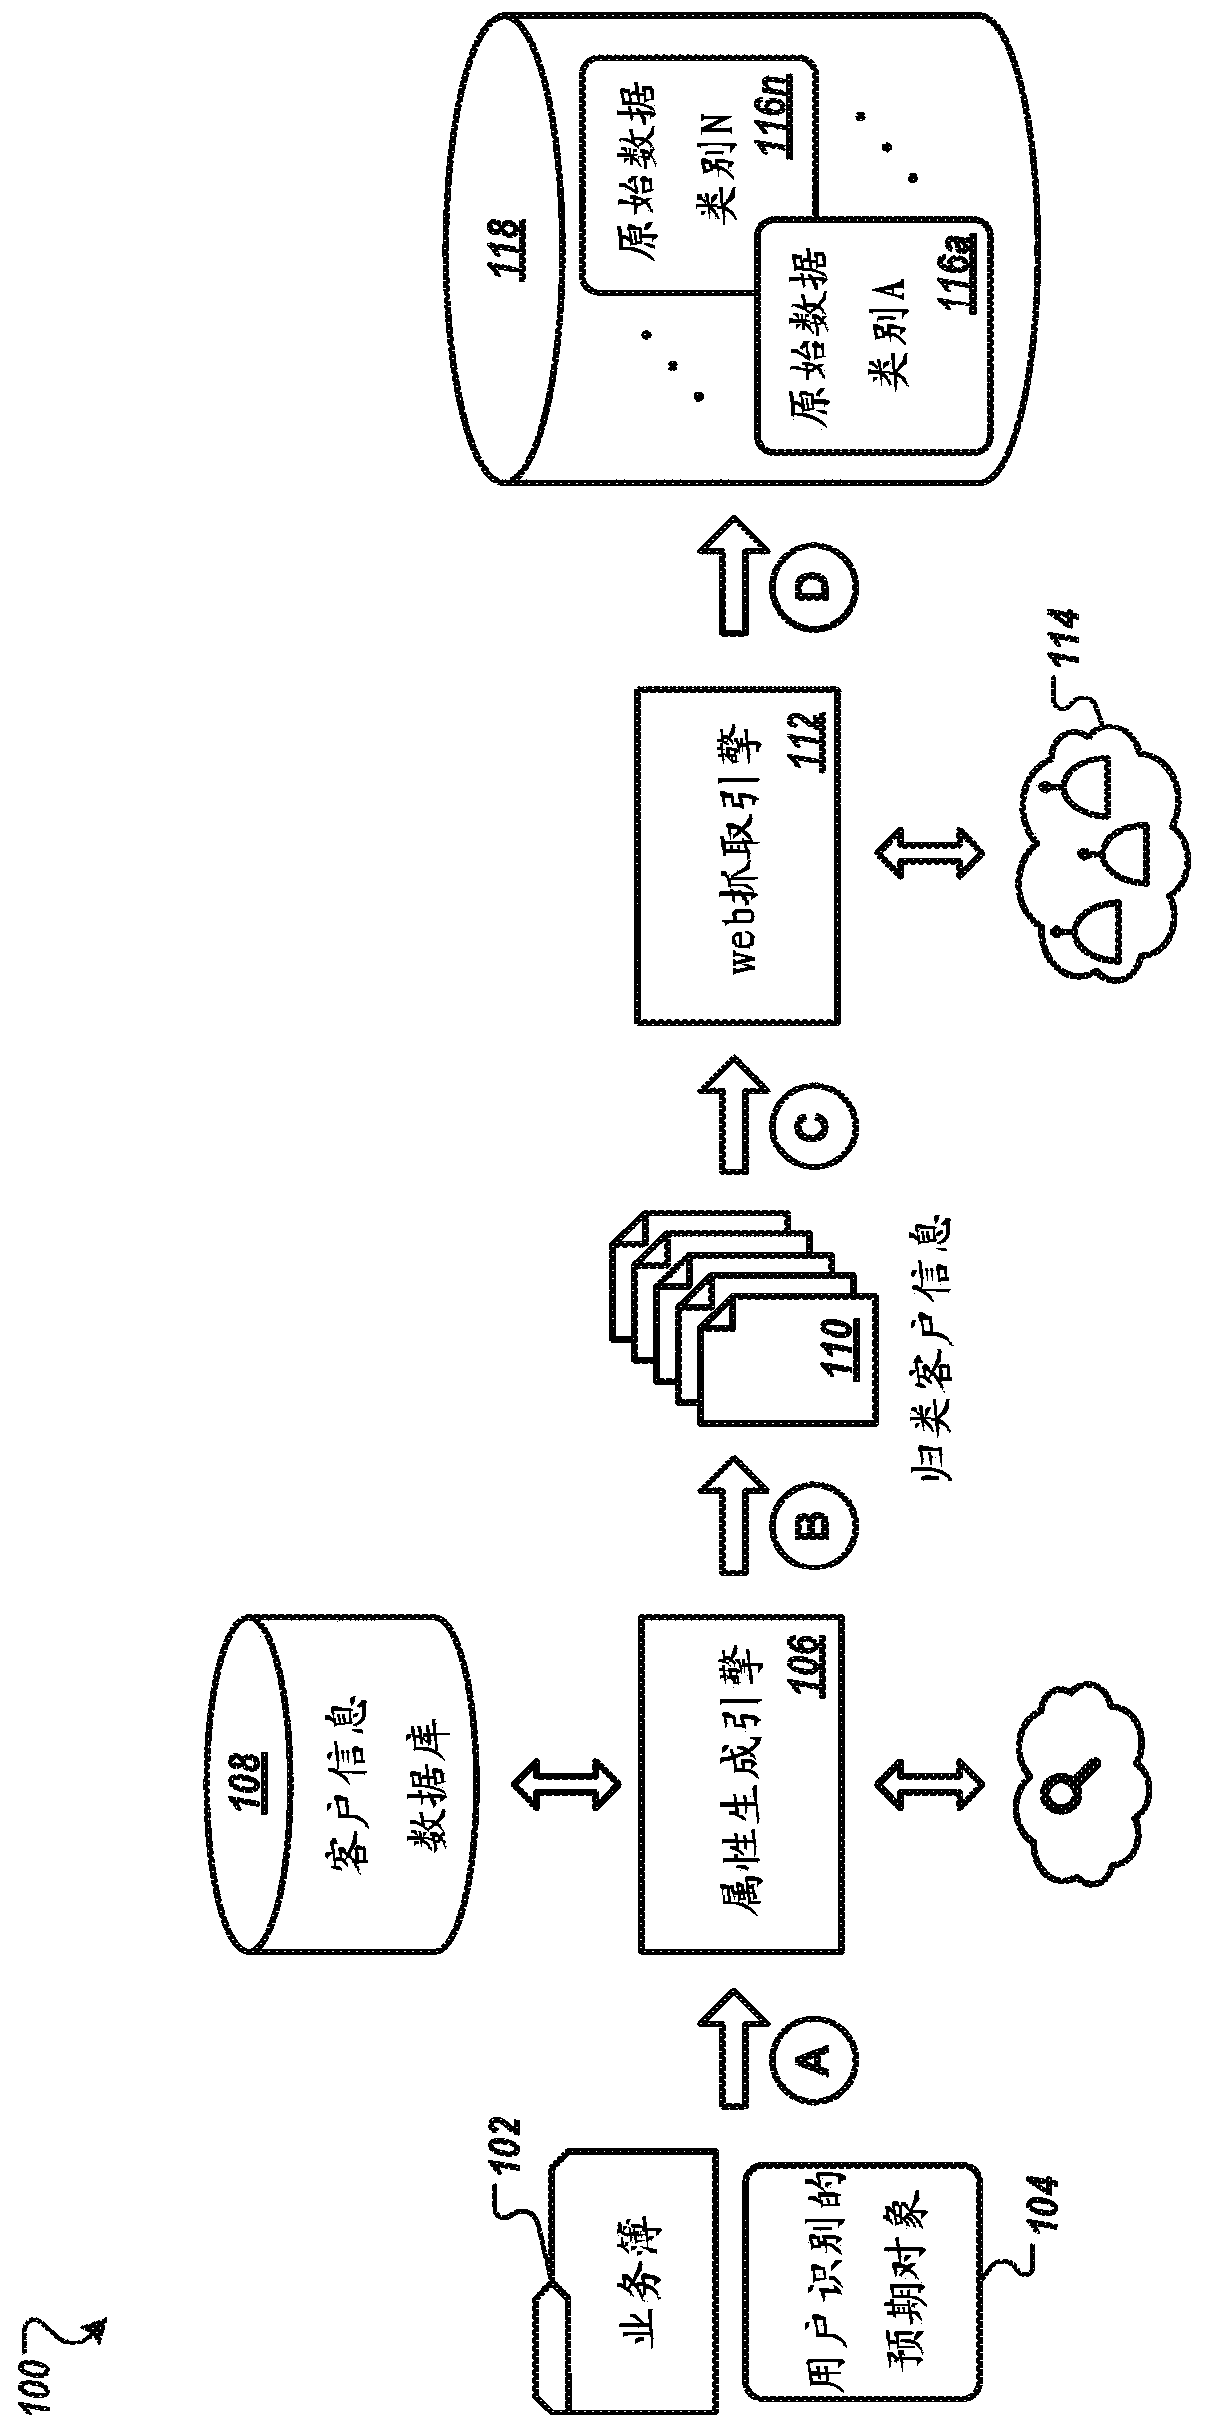 Systems and methods for intelligent prospect identification using online resources and neural network processing to classify organizations based on published materials